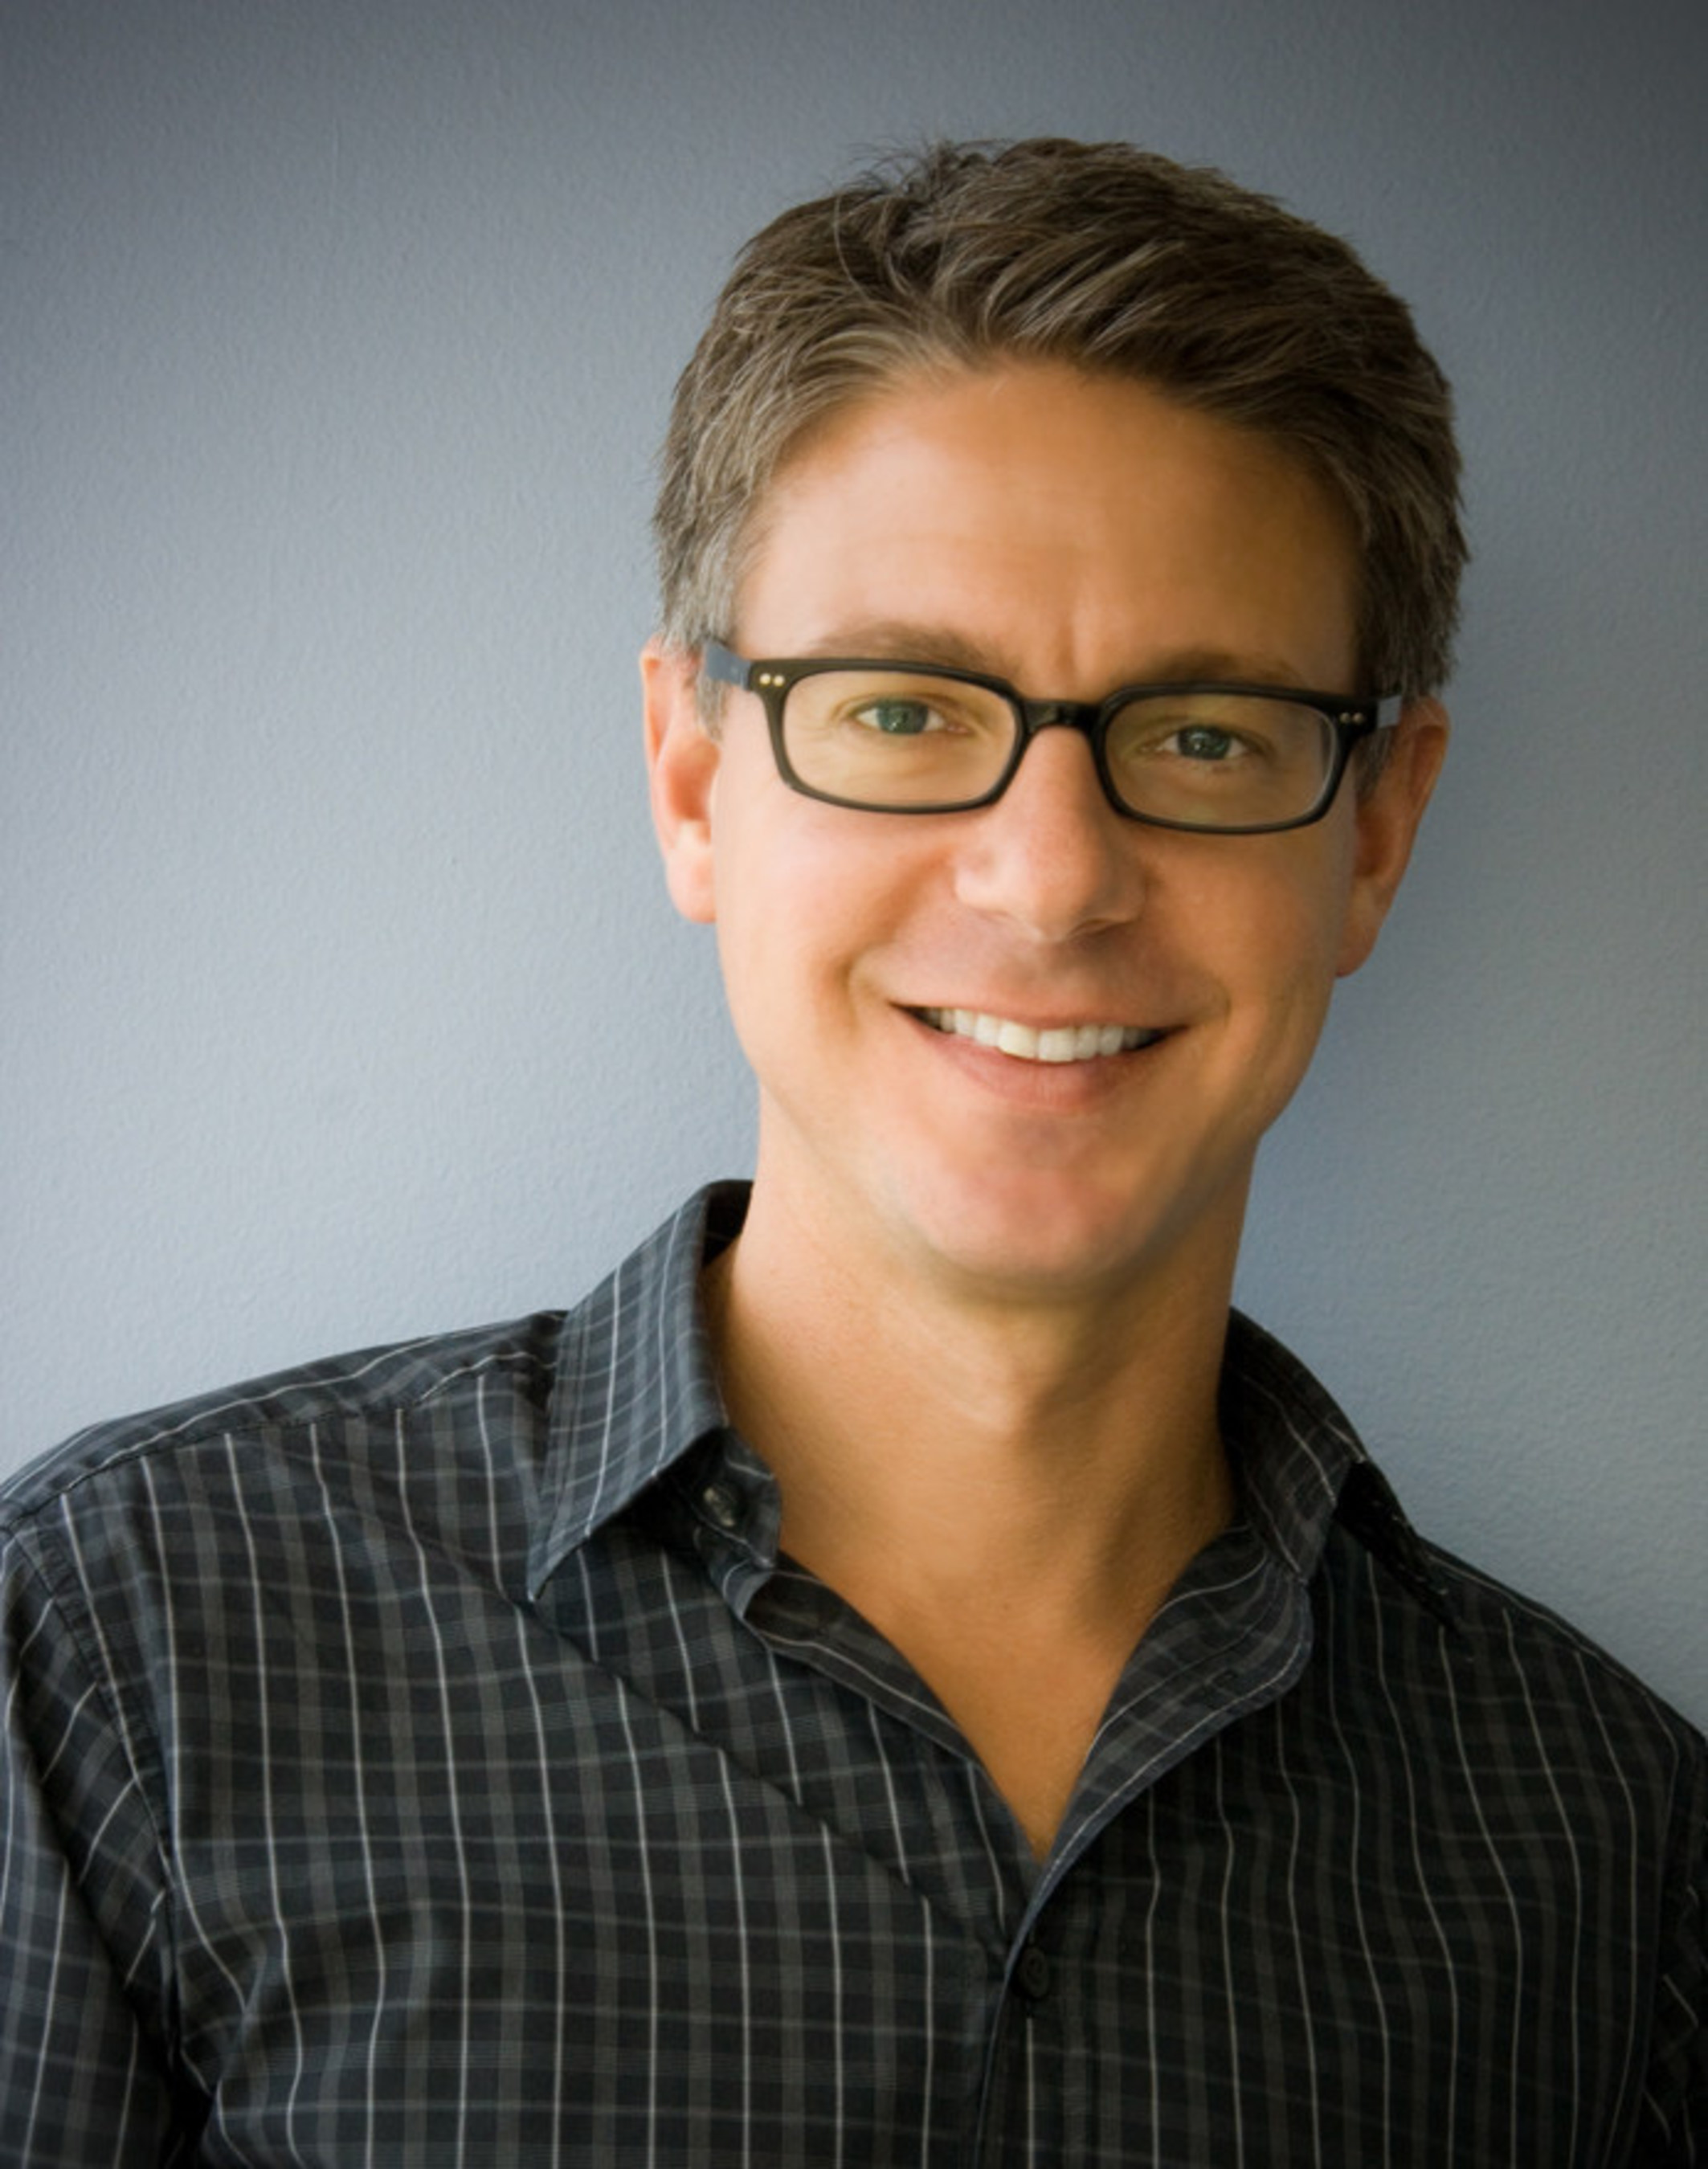 Razorfish hires former Sapient executive, Christian Barnard, to the Central Region leadership team. Barnard joins agency as group vice president of client engagement.